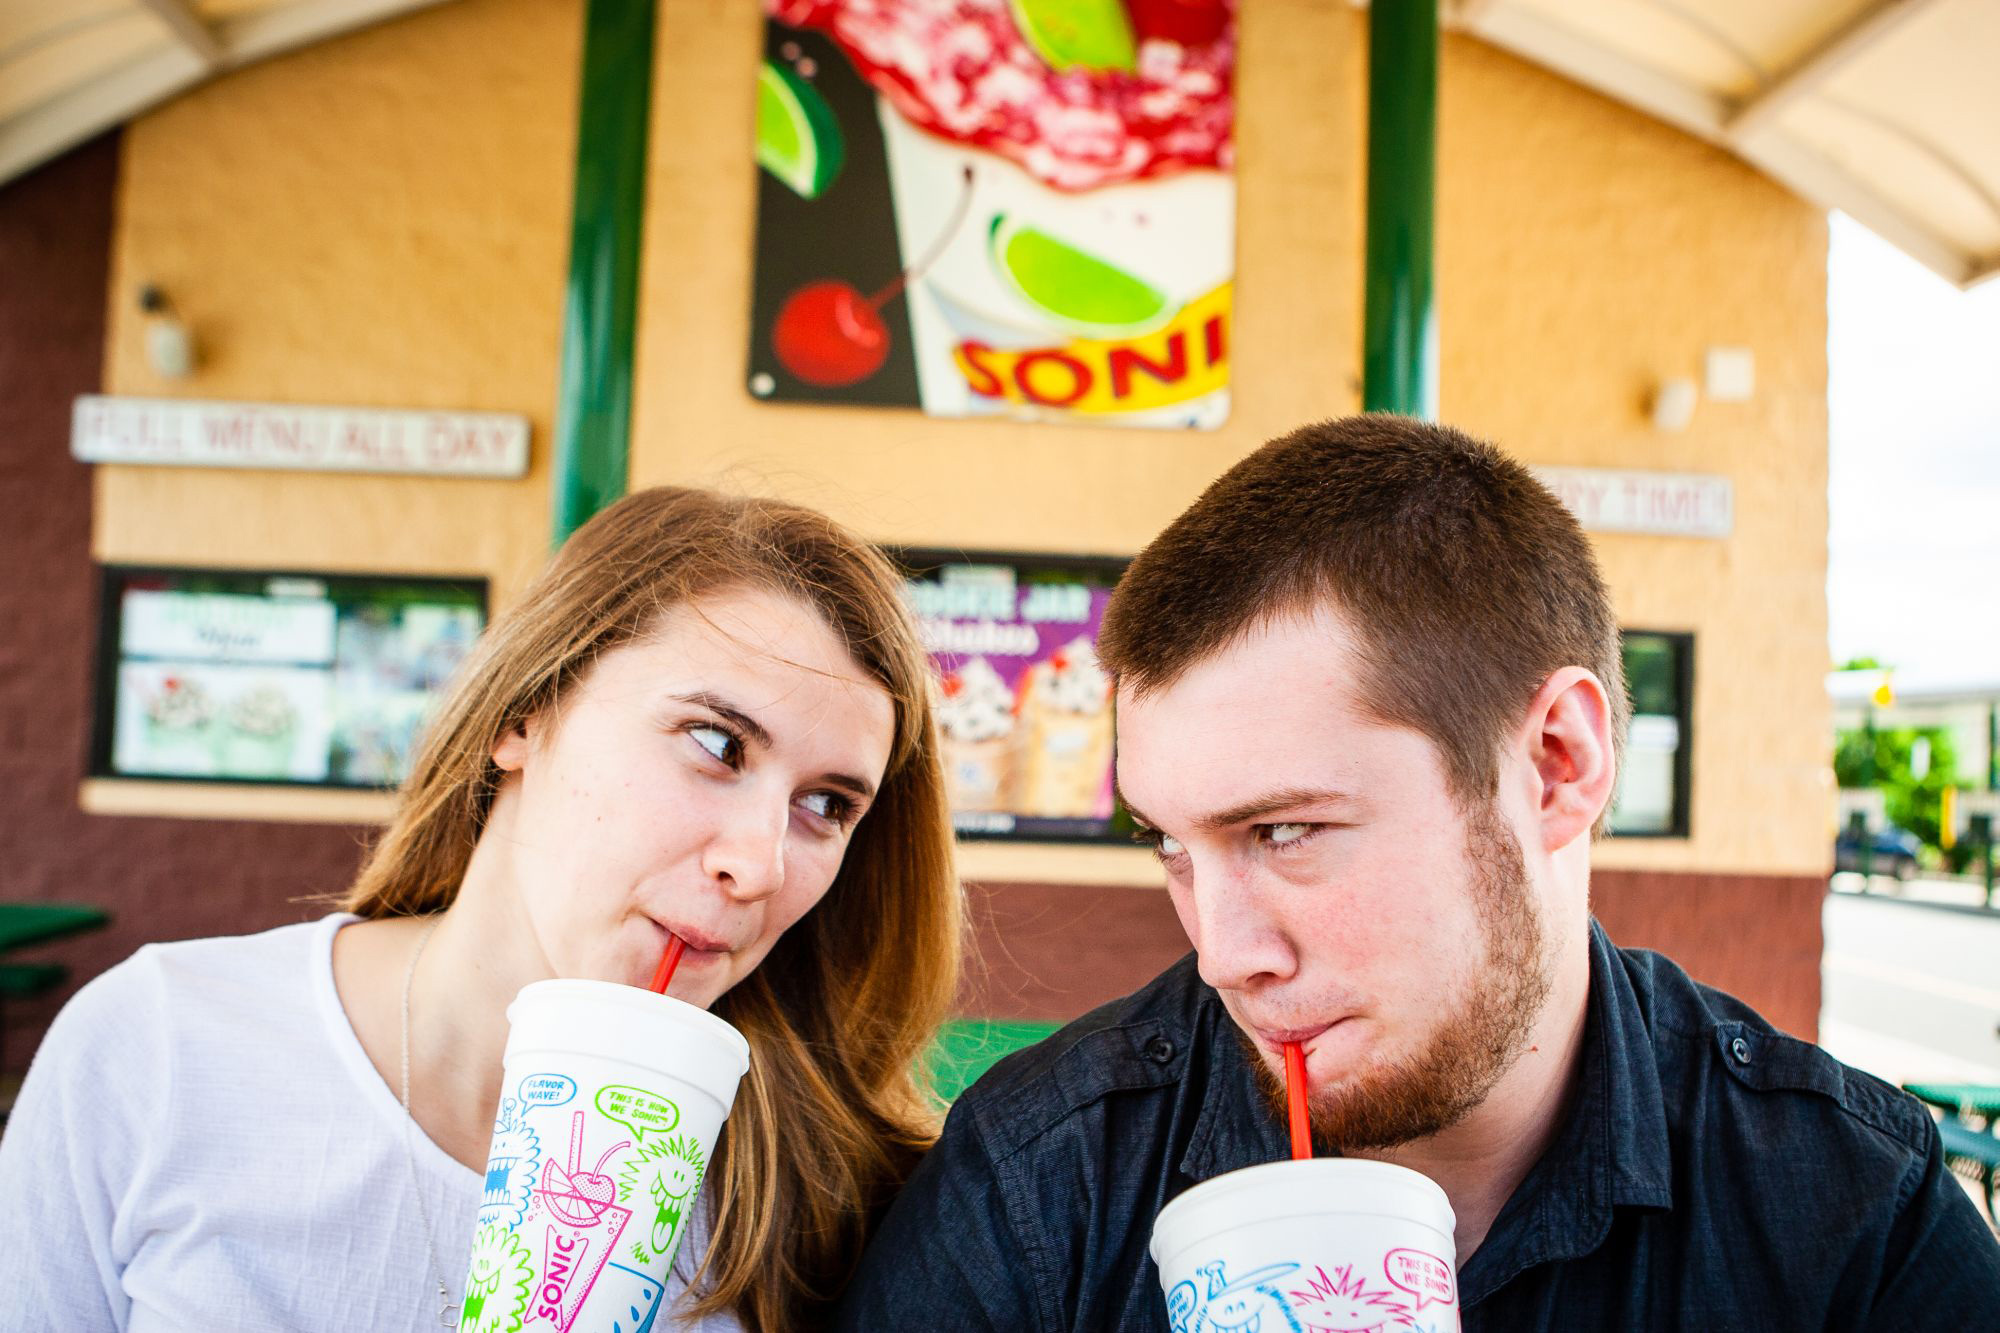 PHOTO: New Jersey couple Justin Burgoon and Julie McCutcheon took their engagement pictures at Sonic, where they met.